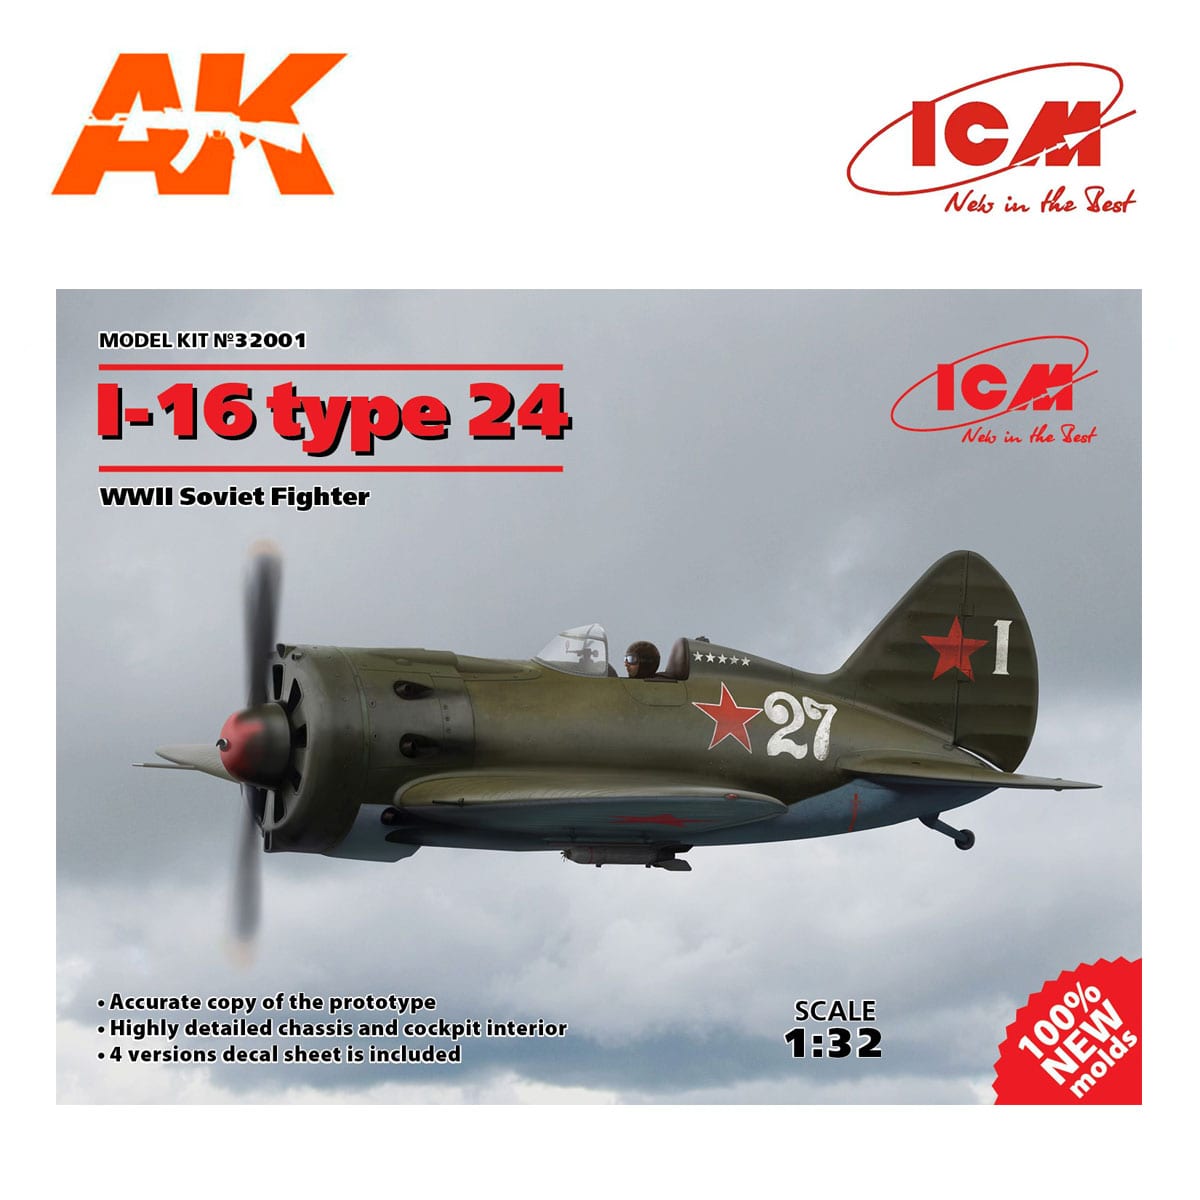 I-16 type 24, WWII Soviet Fighter (100% new molds) 1/32